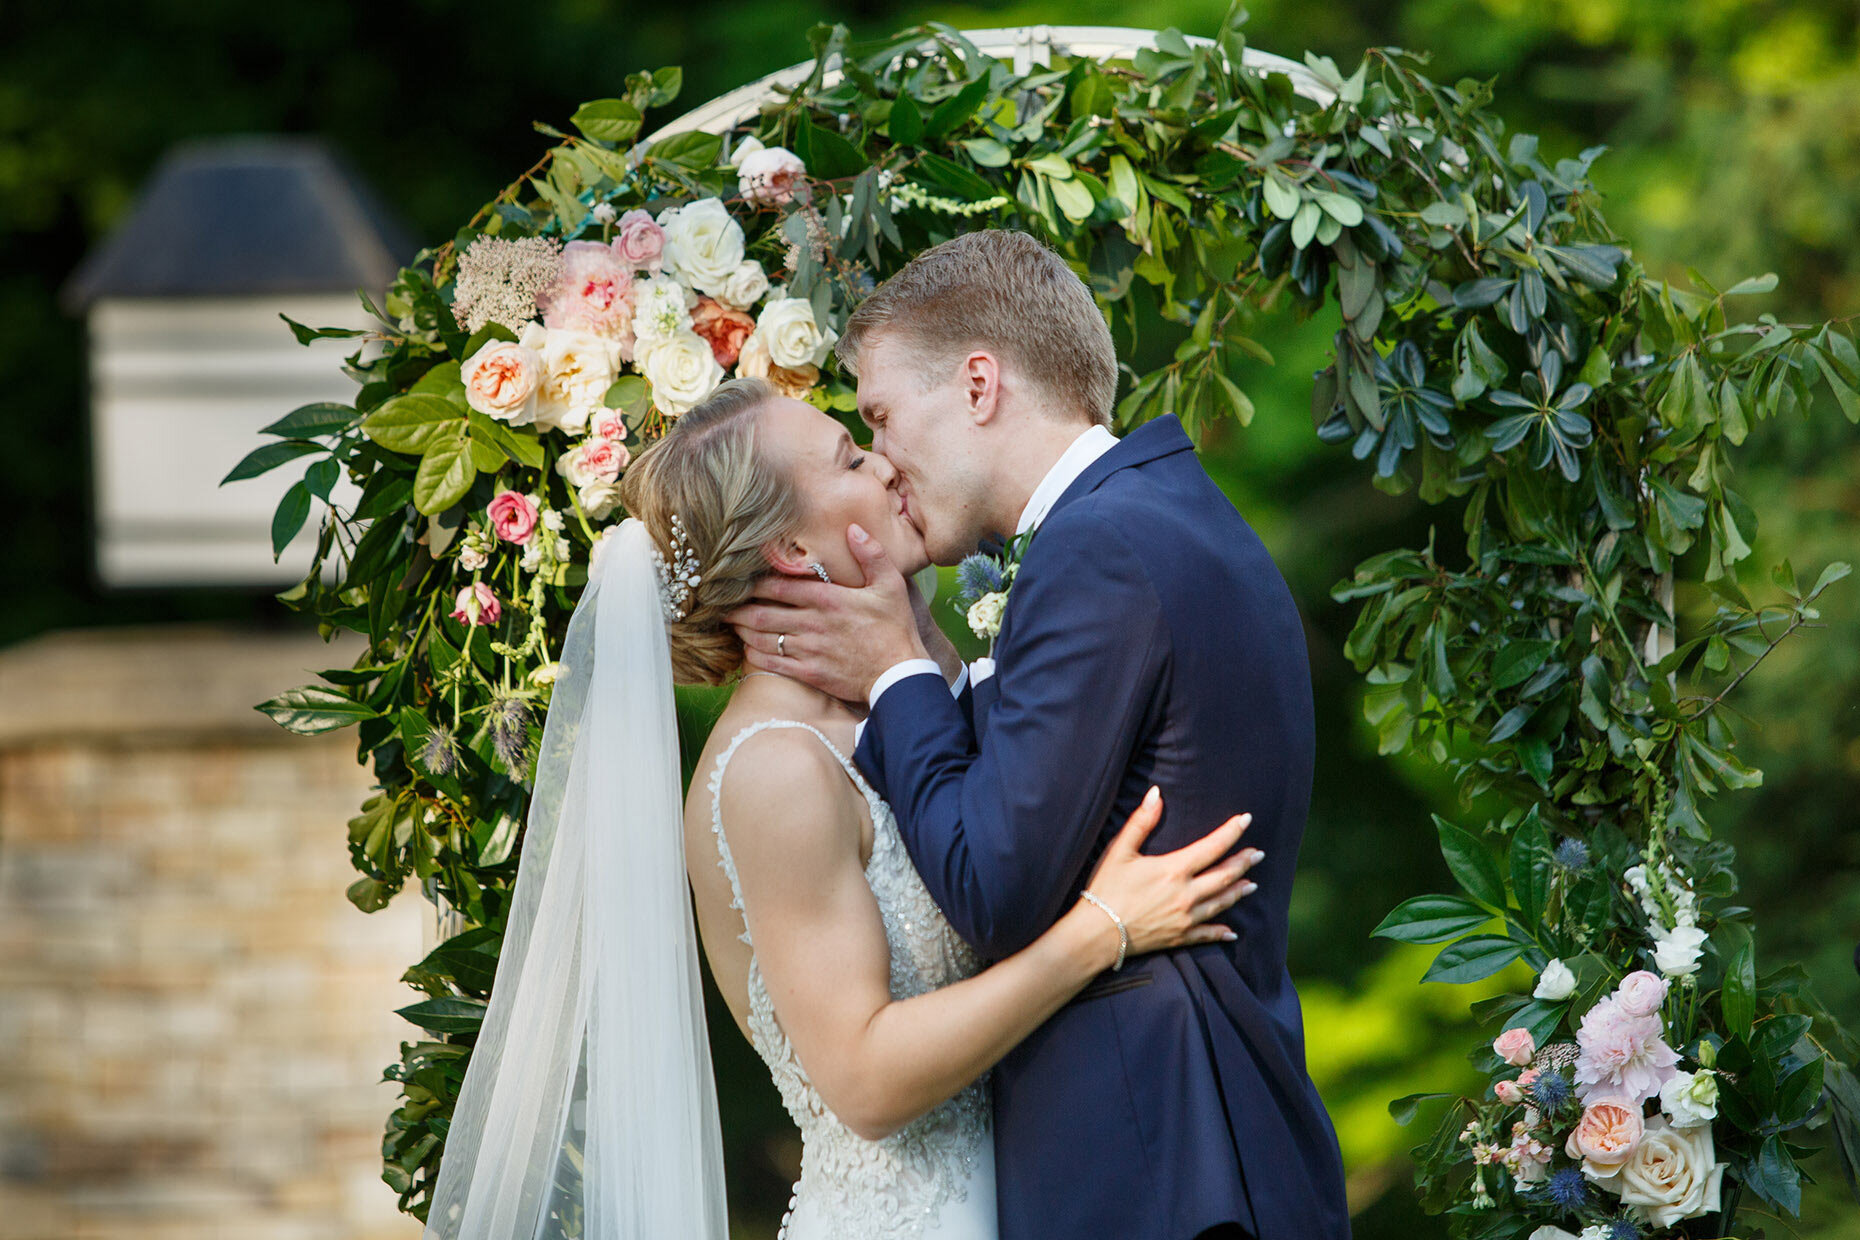 First Kiss at Ceremony